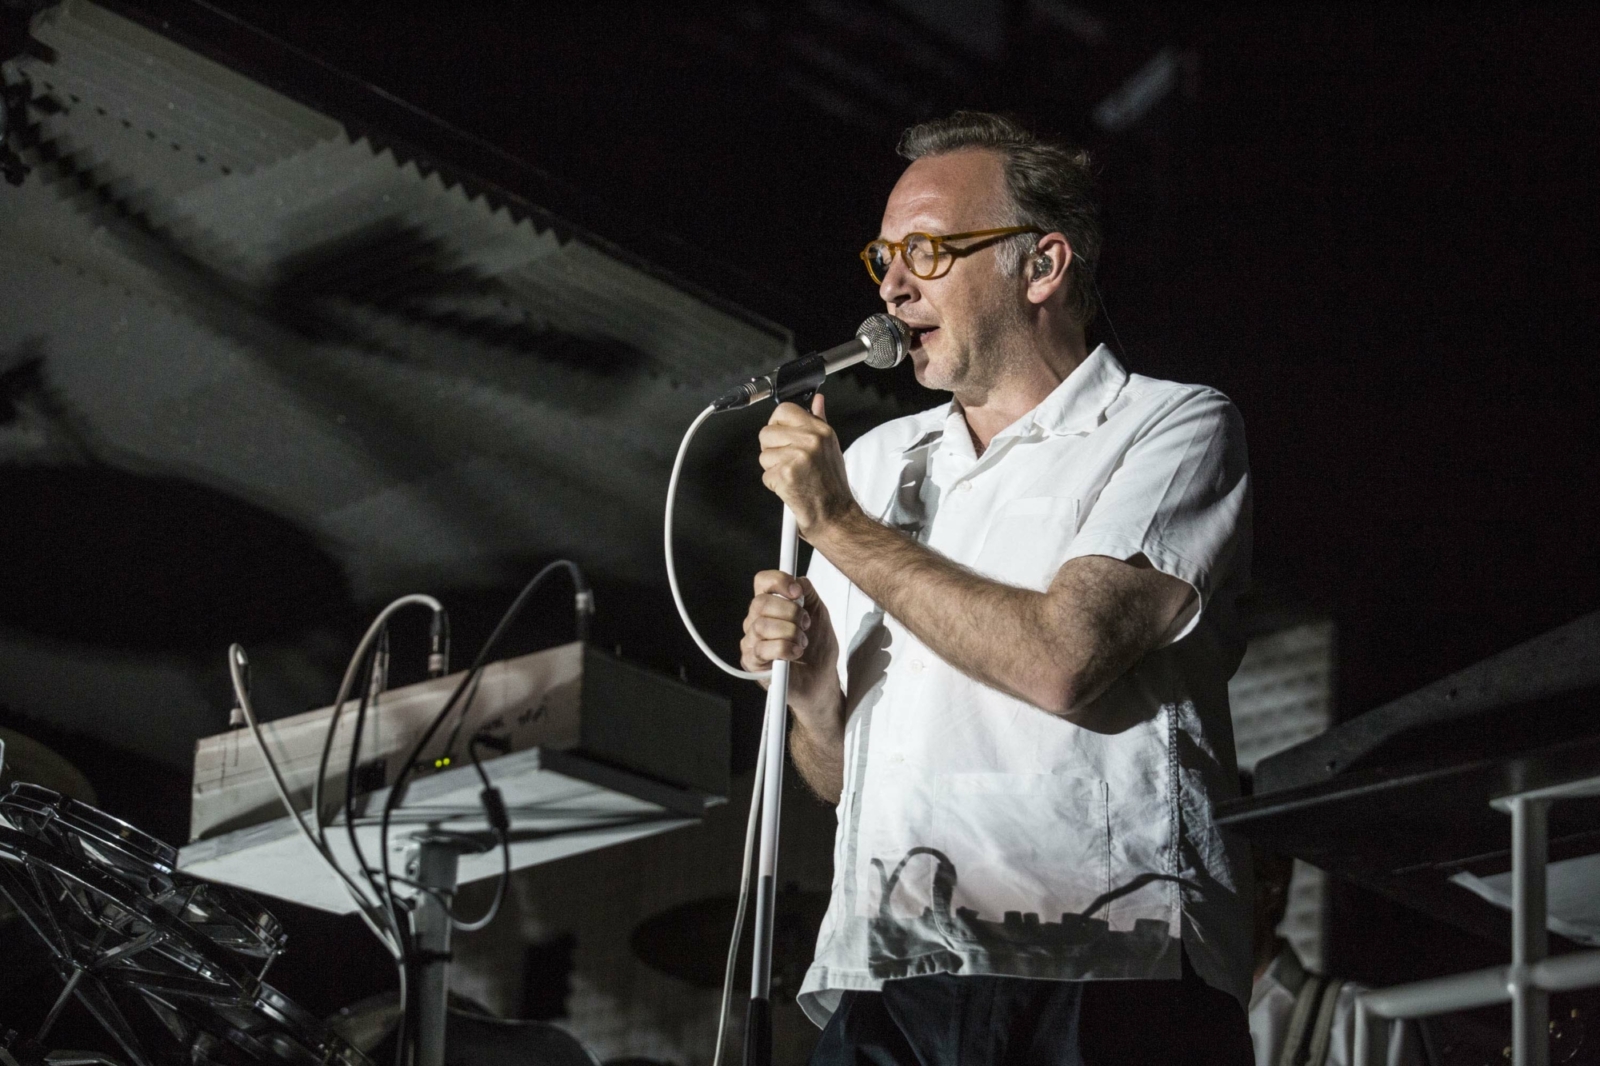 Soulwax to replace Justice at Bestival